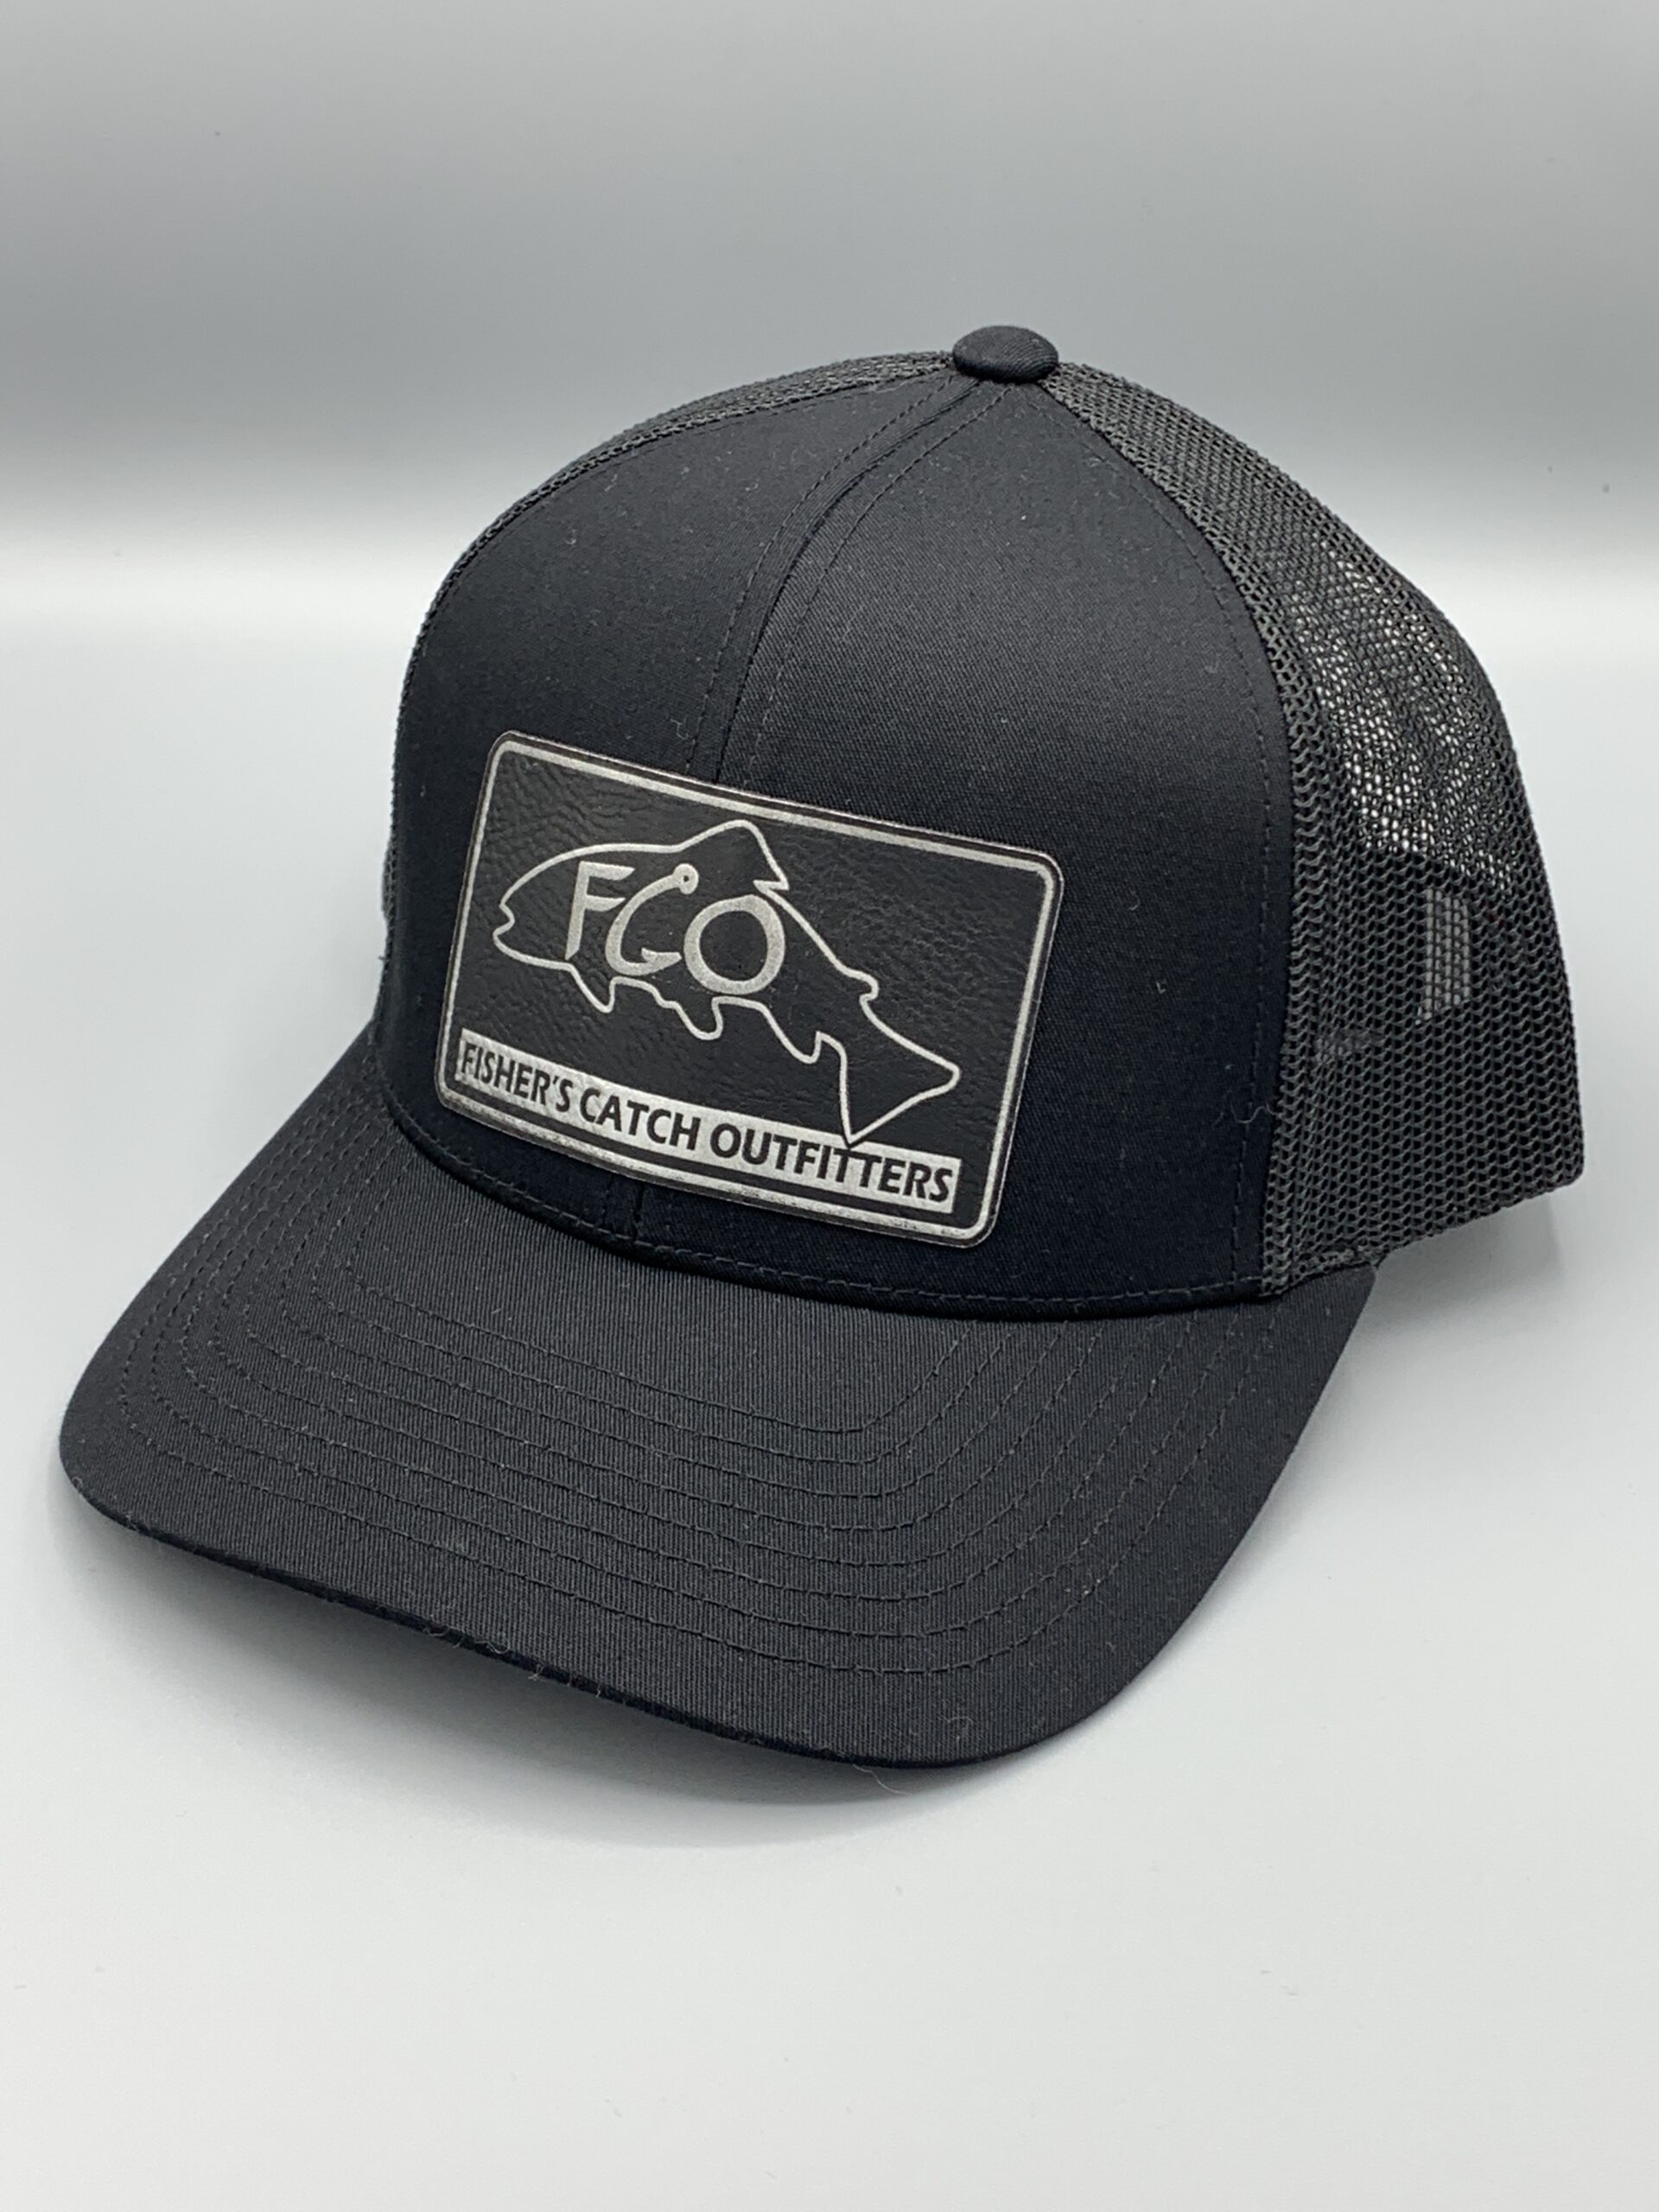 Fishers Catch Outfitters Black Patch Hat – Fishers Catch Outfitters